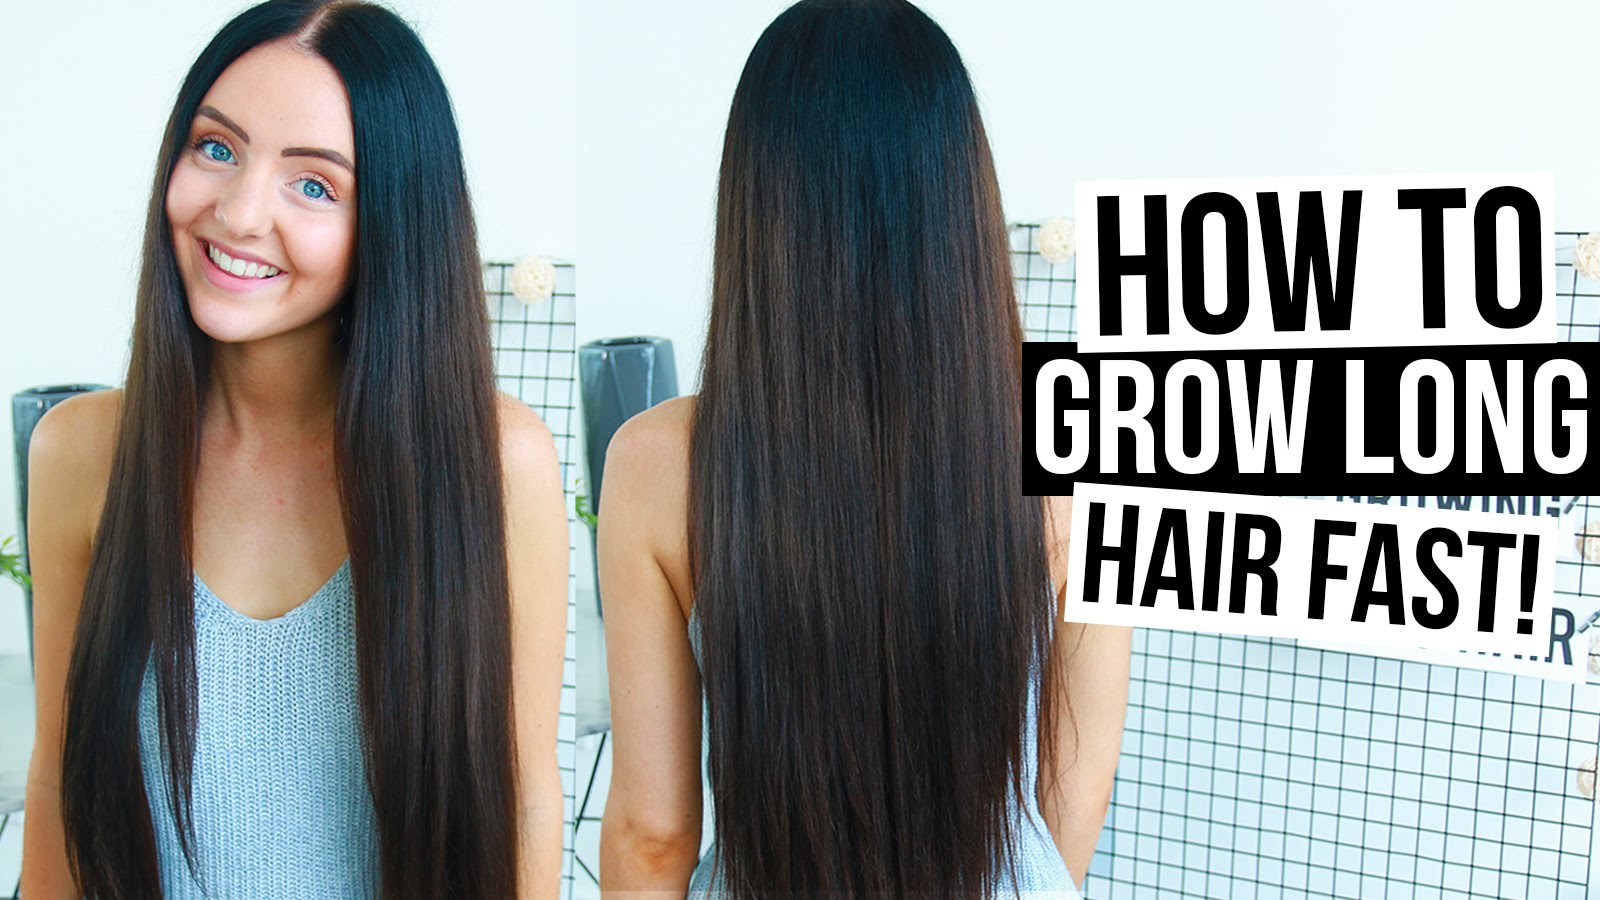 HOW TO GROW SUPER LONG HAIR